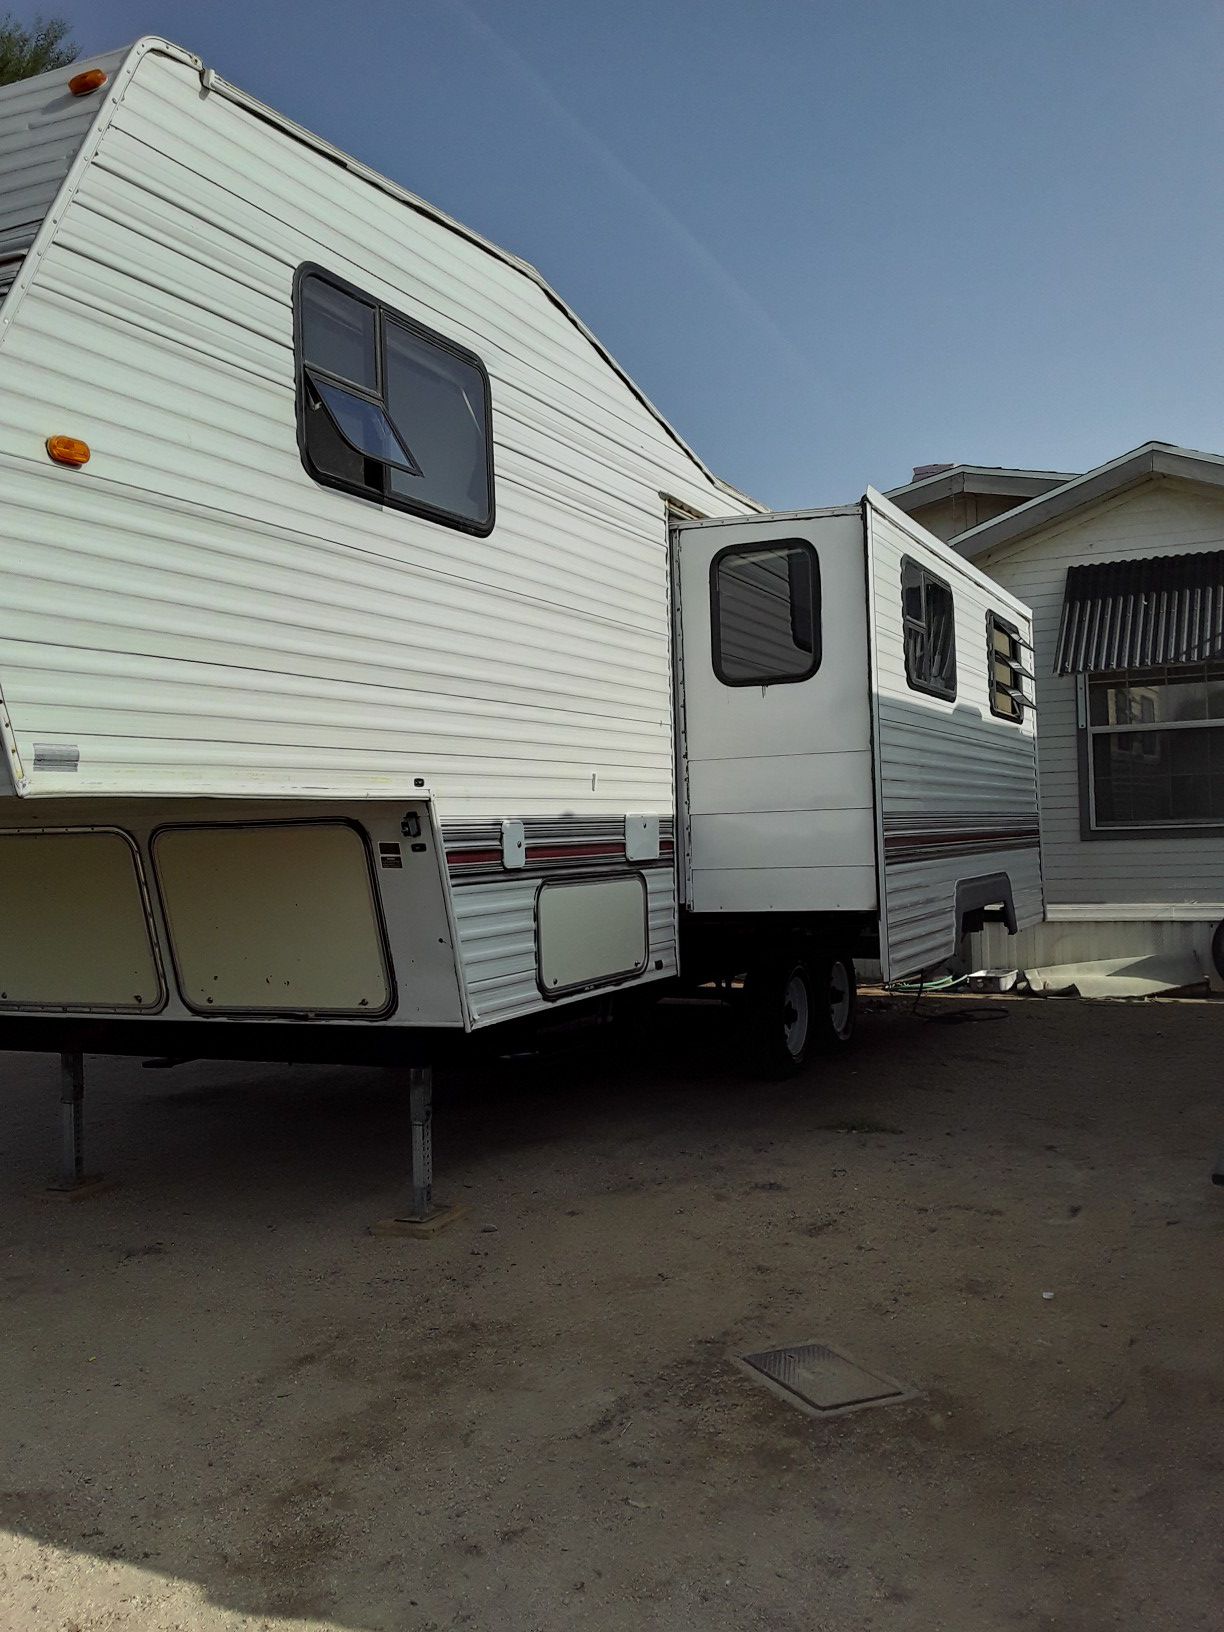 1994 nomad fifth wheel trailer